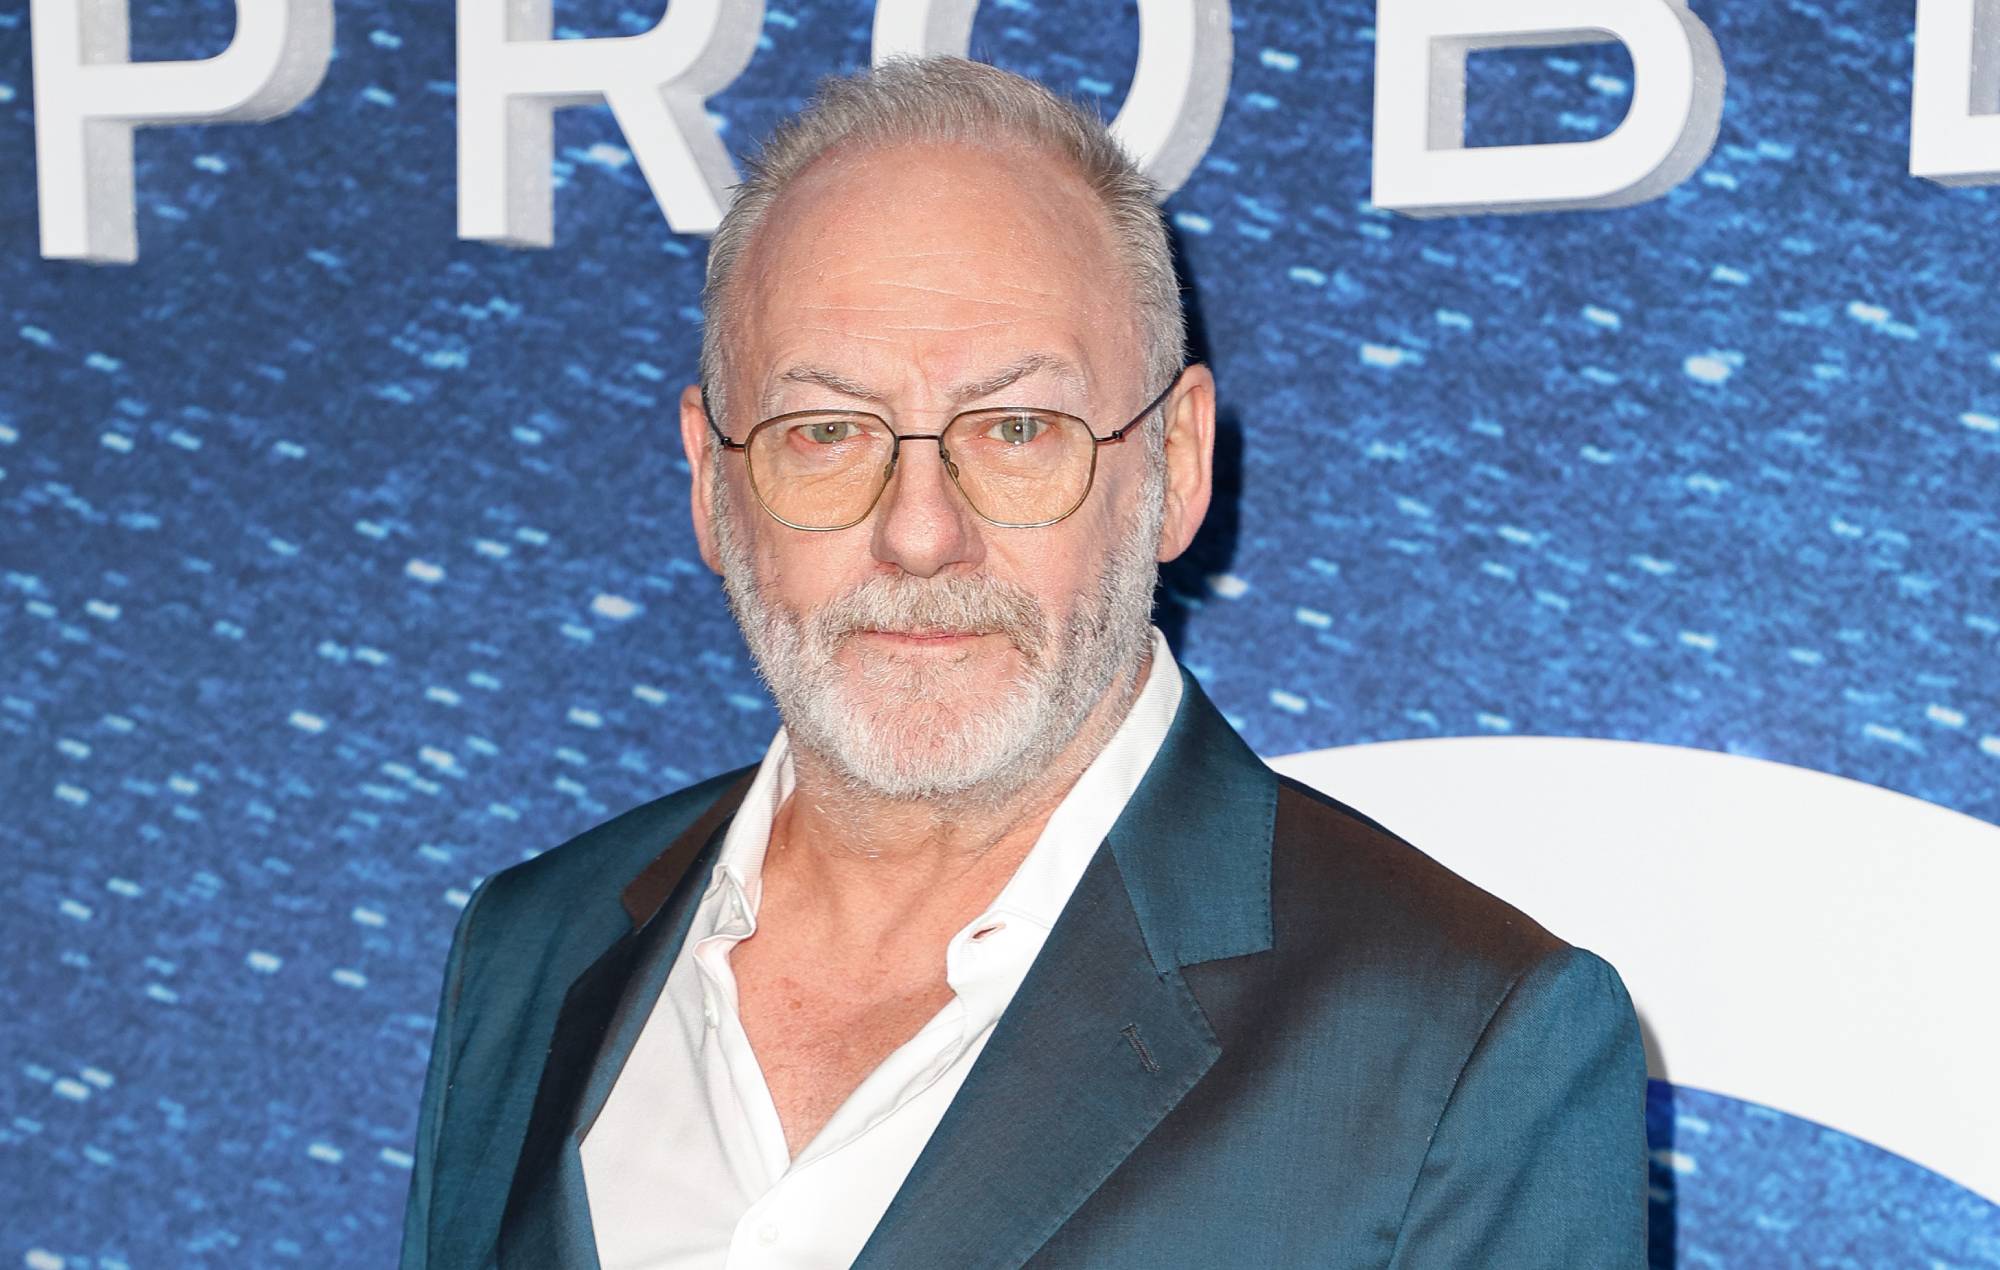 ‘Game Of Thrones’ actor Liam Cunningham hits out at Hollywood “ignoring” Gaza